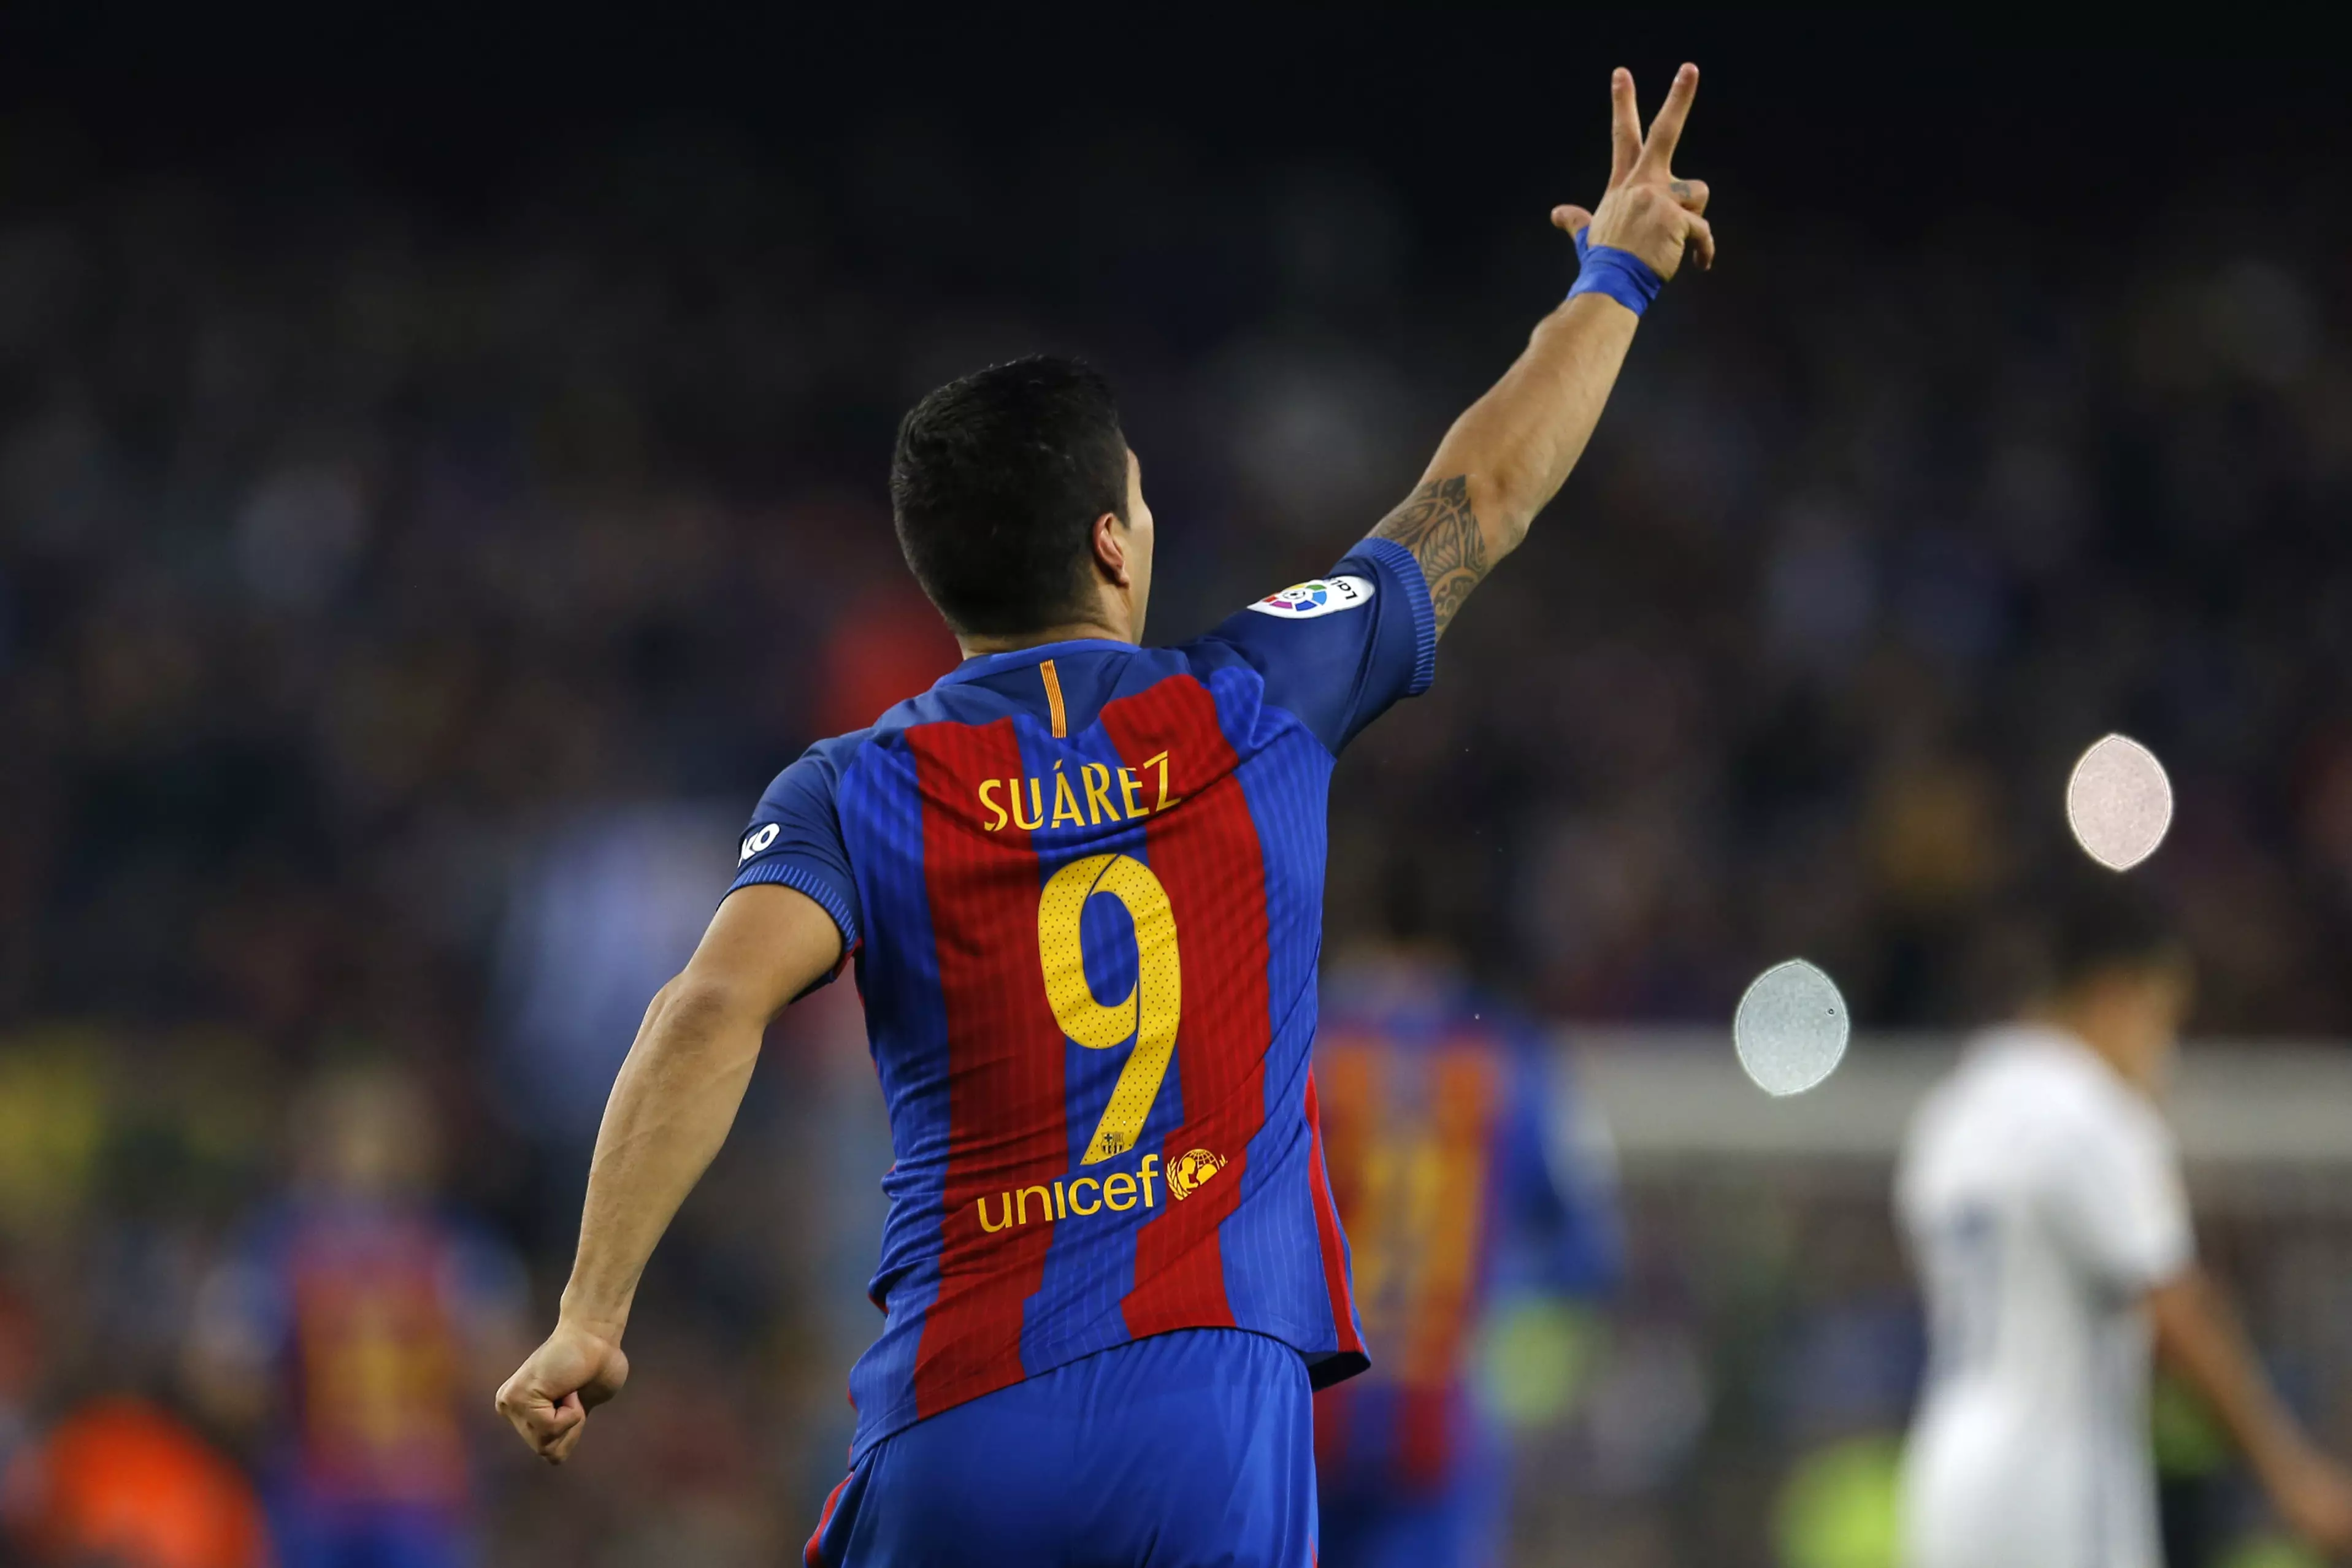 Luis Suarez Reveals His One Big Career Ambition In Football